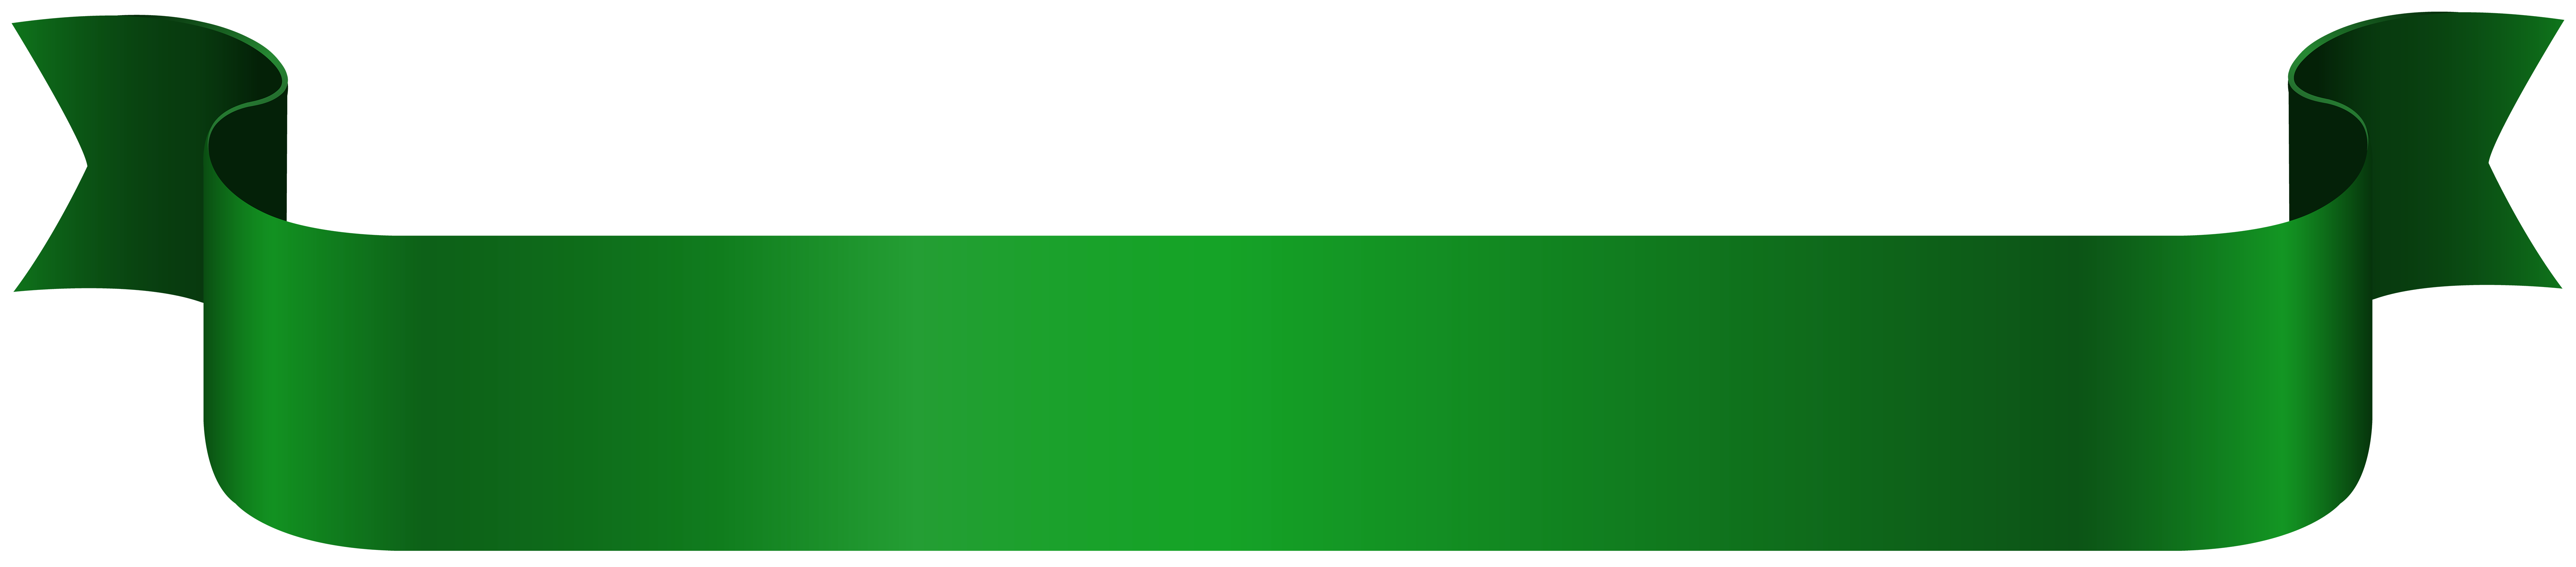 Green banner png.